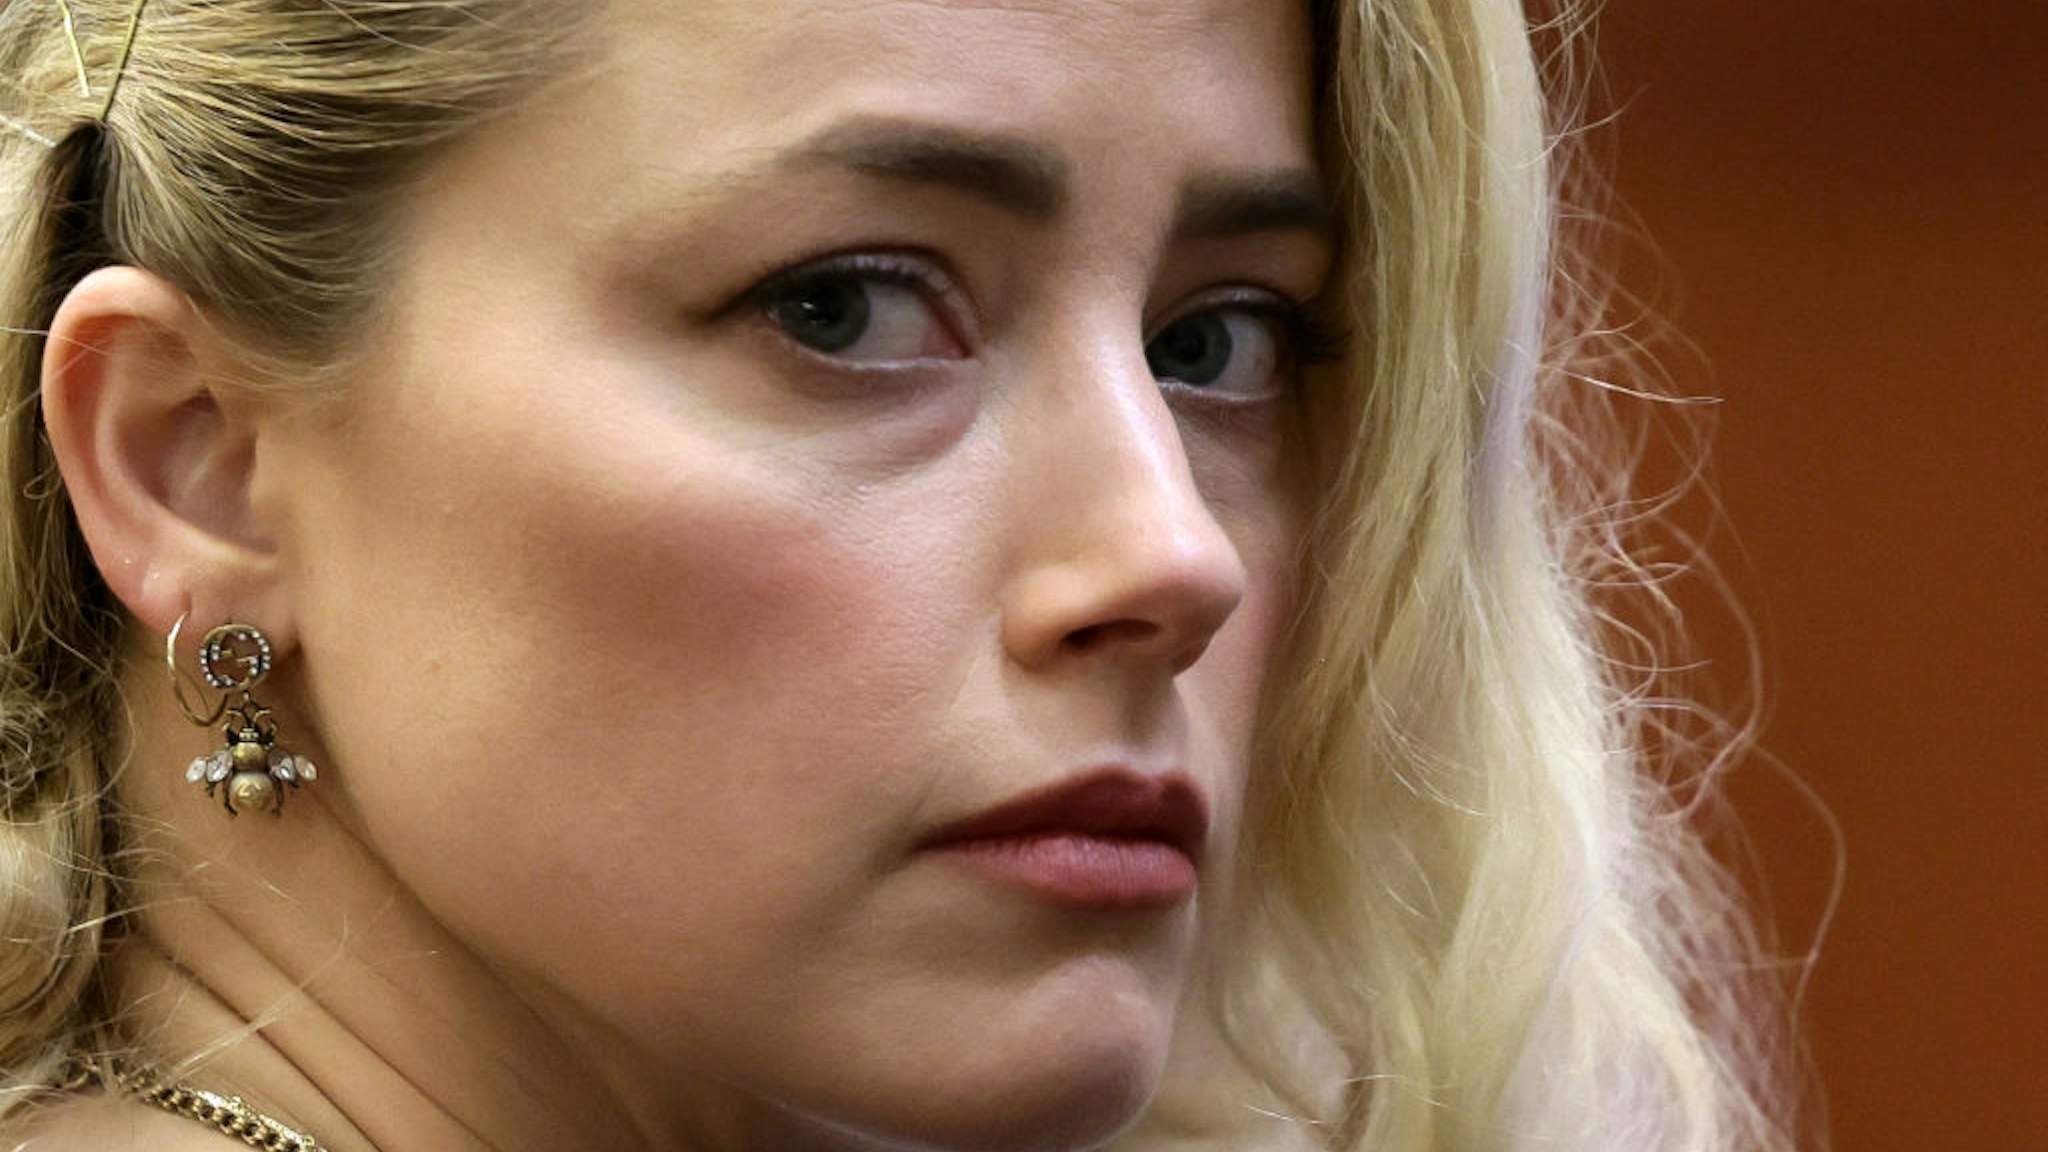 TOPSHOT - US actress Amber Heard waits before the jury announced a split verdict in favor of both Johnny Depp and Amber Heard on their claim and counter-claim in the Depp v. Heard civil defamation trial at the Fairfax County Circuit Courthouse in Fairfax, Virginia, on June 1, 2022. - A US jury on Wednesday found Johnny Depp and Amber Heard defamed each other, but sided far more strongly with the "Pirates of the Caribbean" star following an intense libel trial involving bitterly contested allegations of sexual violence and domestic abuse. (Photo by EVELYN HOCKSTEIN / POOL / AFP) (Photo by EVELYN HOCKSTEIN/POOL/AFP via Getty Images)